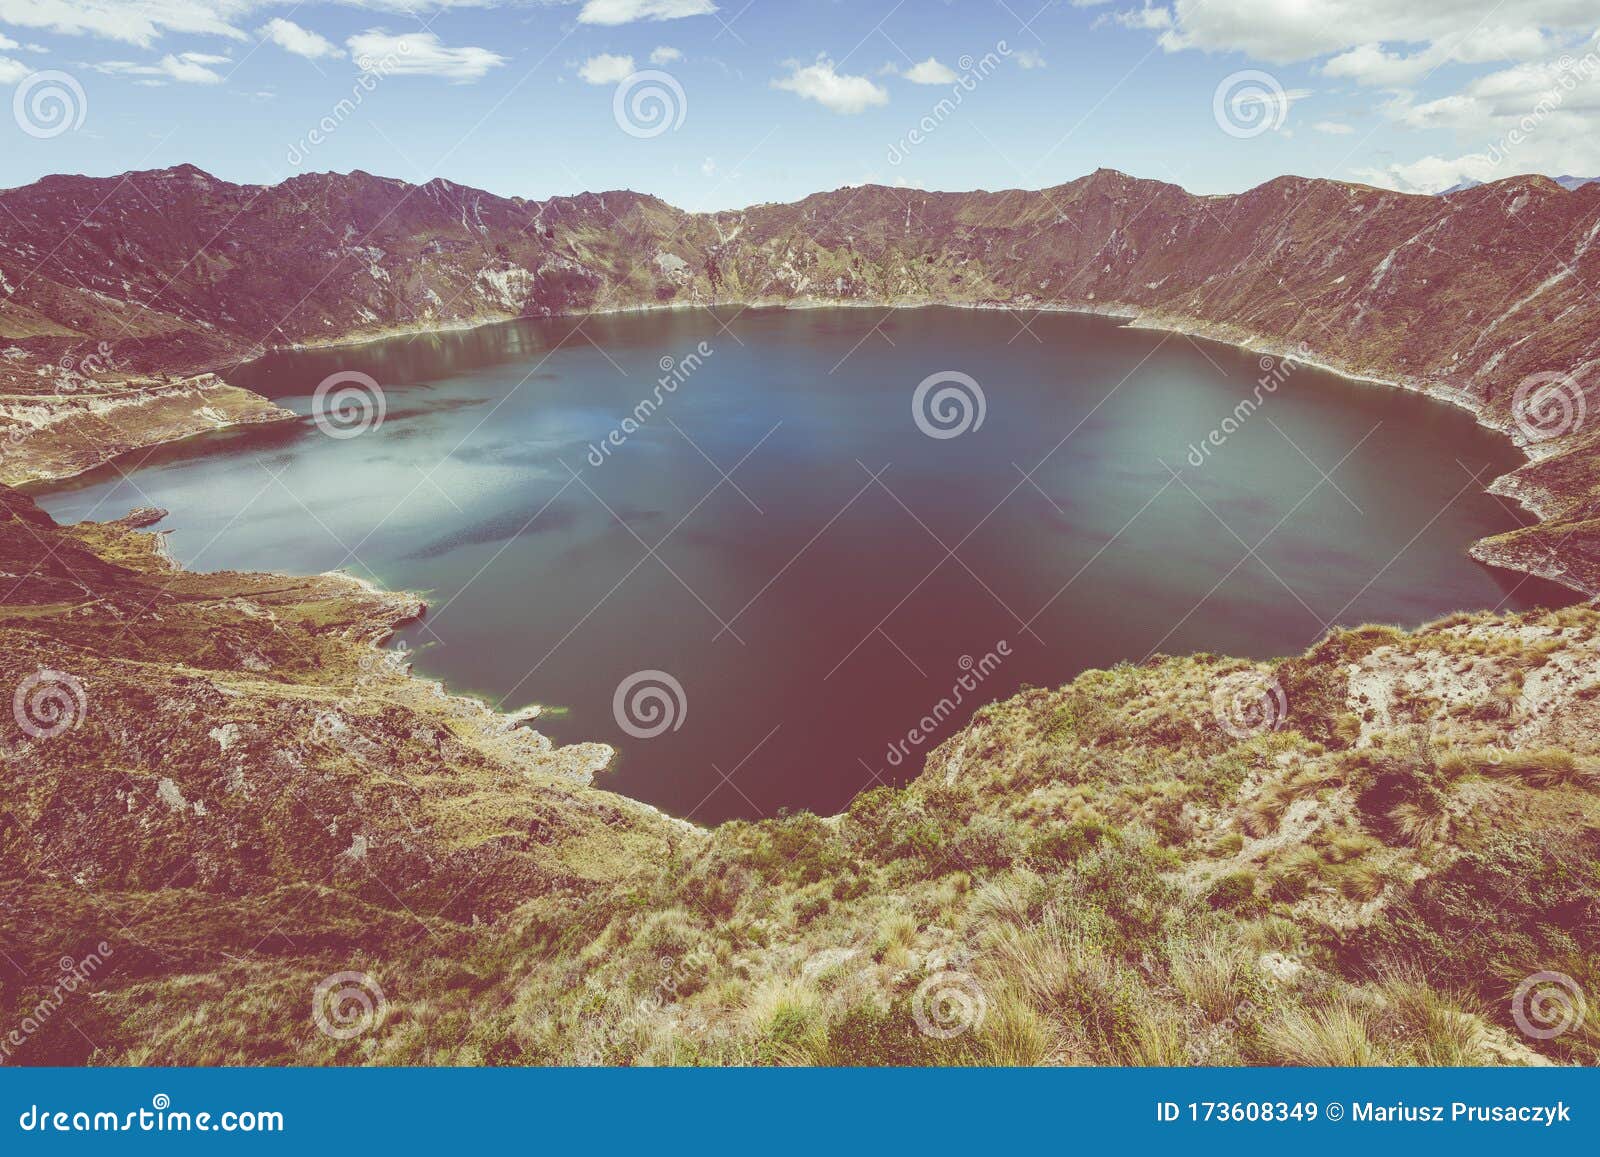  Lake  Quilotoa Panorama Of The Turquoise  Volcano Crater  